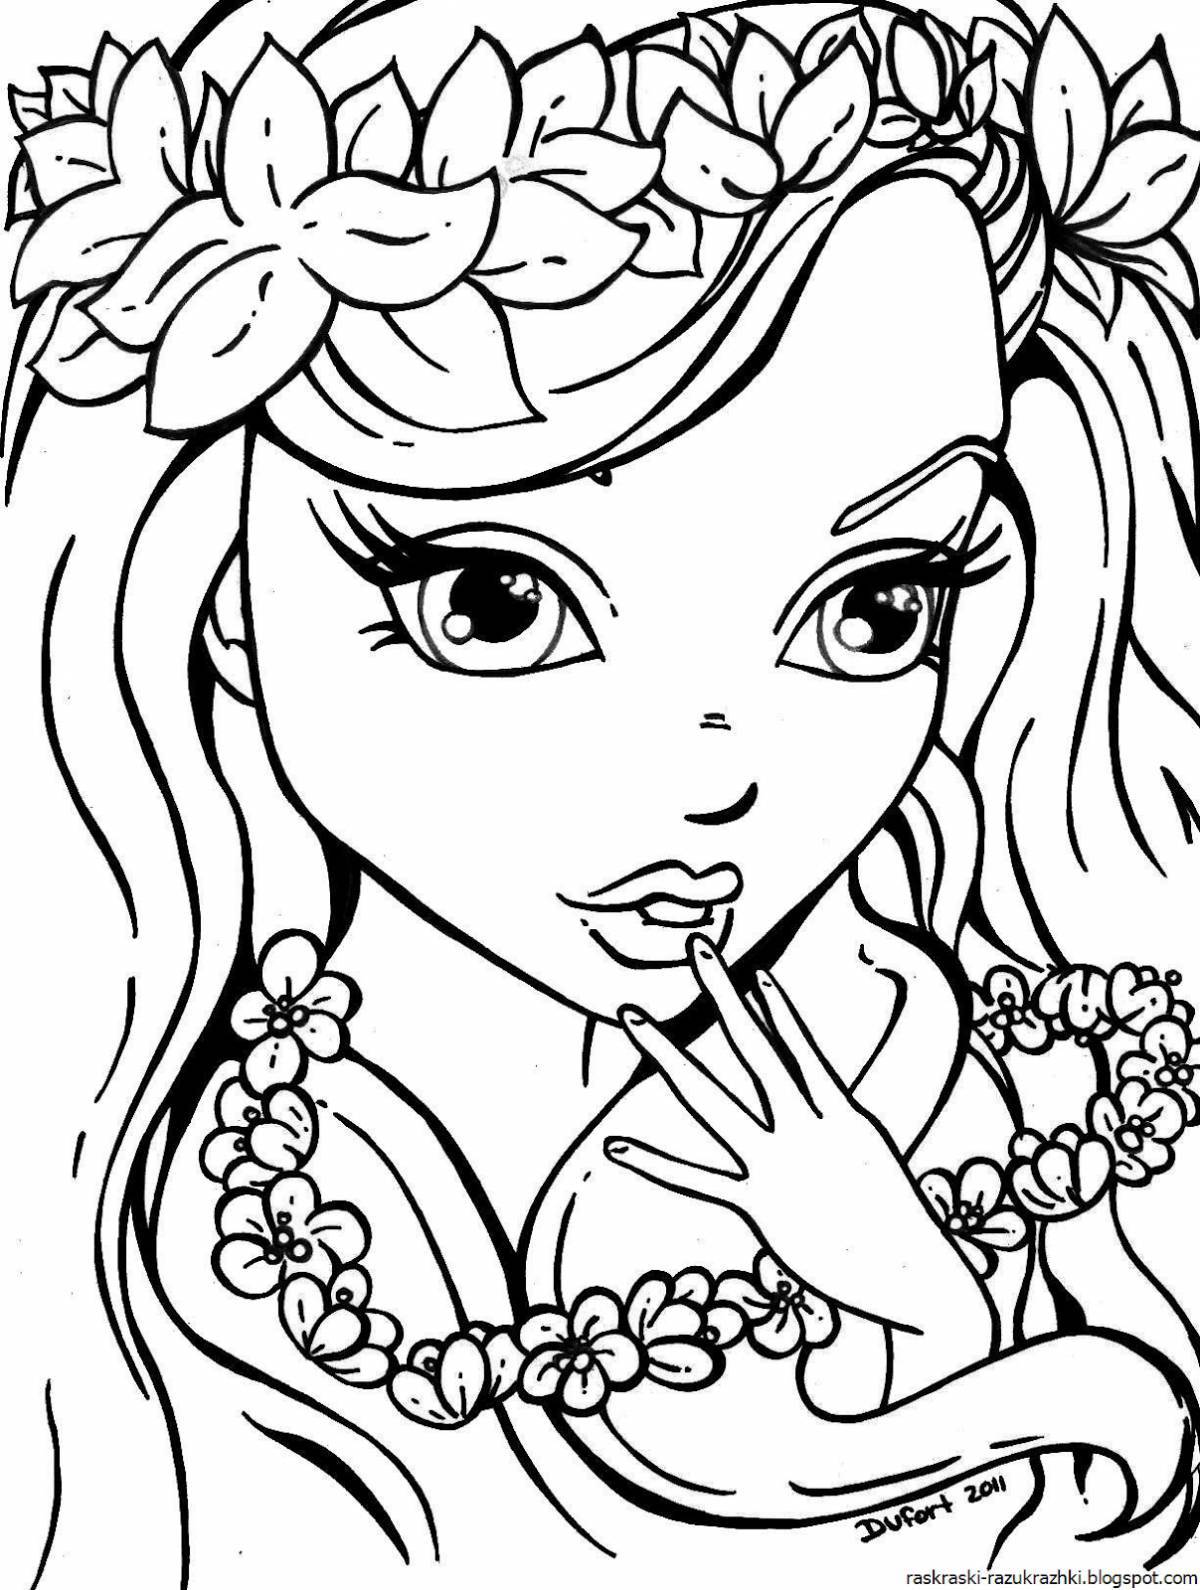 Color riot coloring page for girls